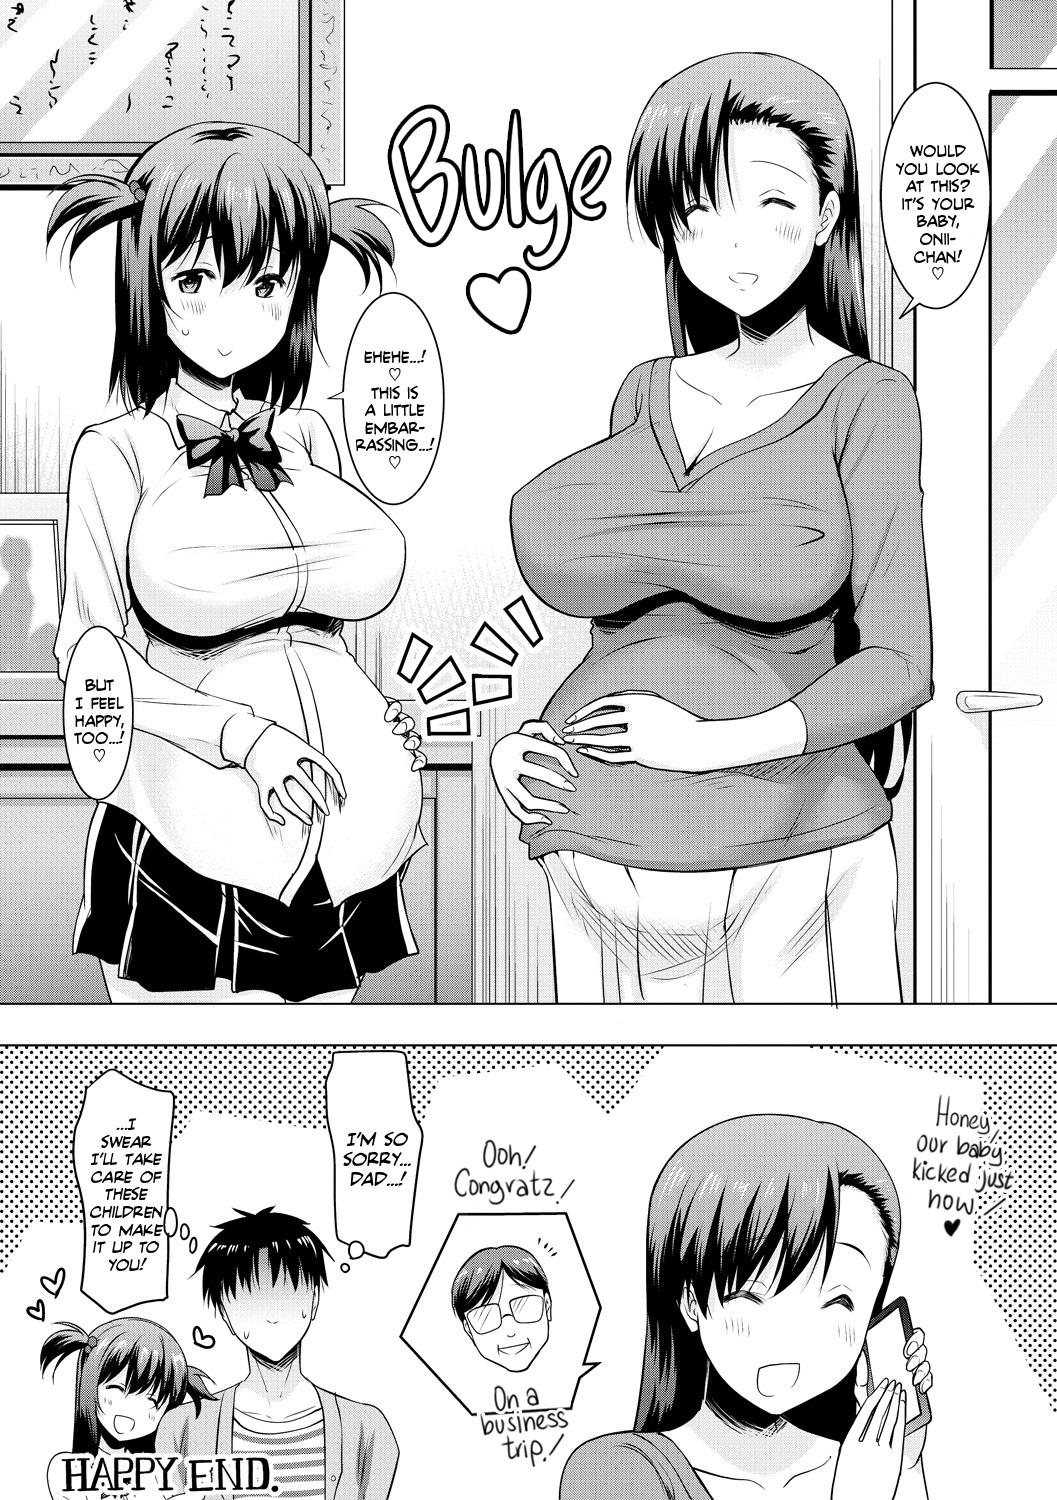 Ethnic [Pony-R] I Can't Live Without My Little Sister's Tongue Chapter 01-02 + Secret Baby-making Sex with a Big-titted Mother and Daughter! (Kyonyuu Oyako no Shita to Shikyuu ni Renzoku Shasei) [English] [Team Rabu2] [Digital] Hugecock - Page 98